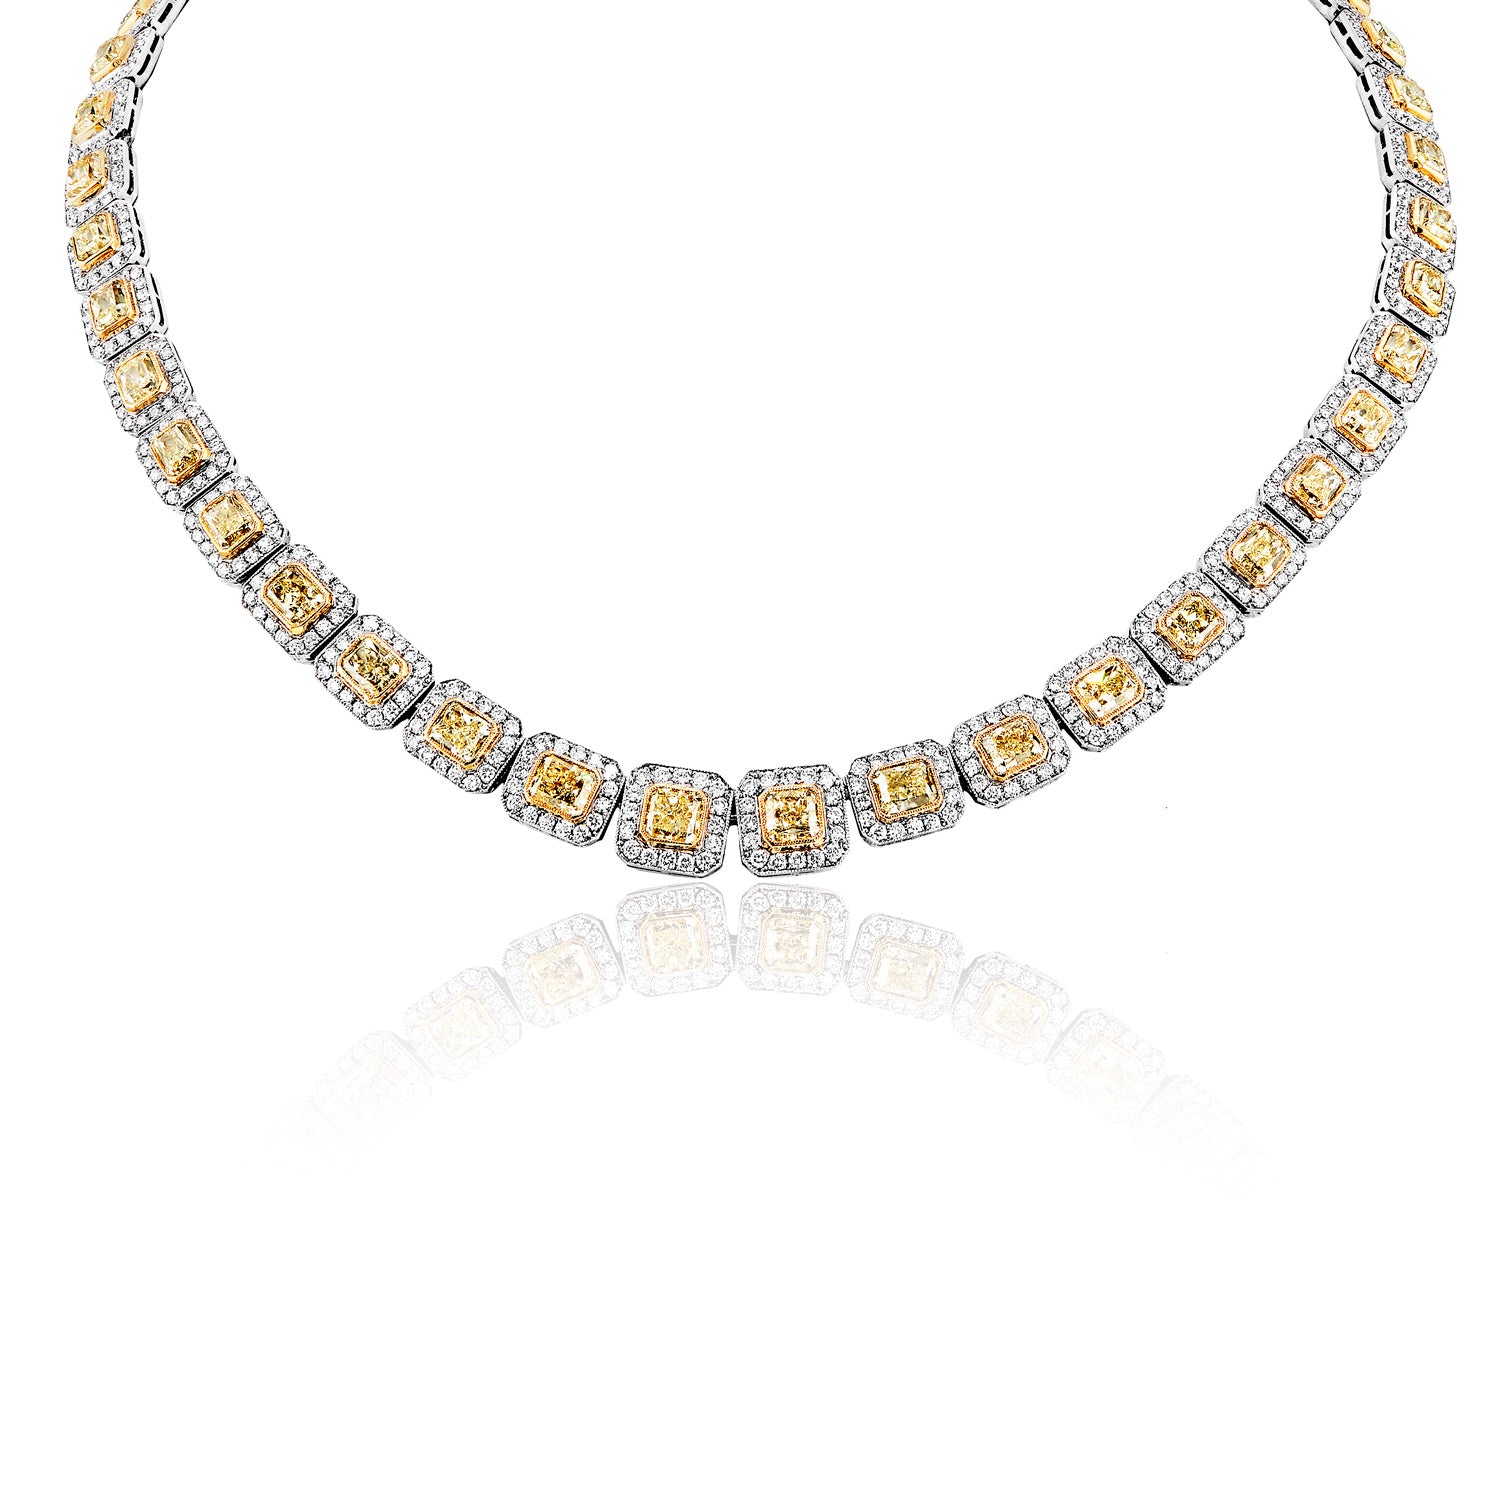 Tinsley 39 Carats Radiant Cut Diamond Tennis Necklace Full View